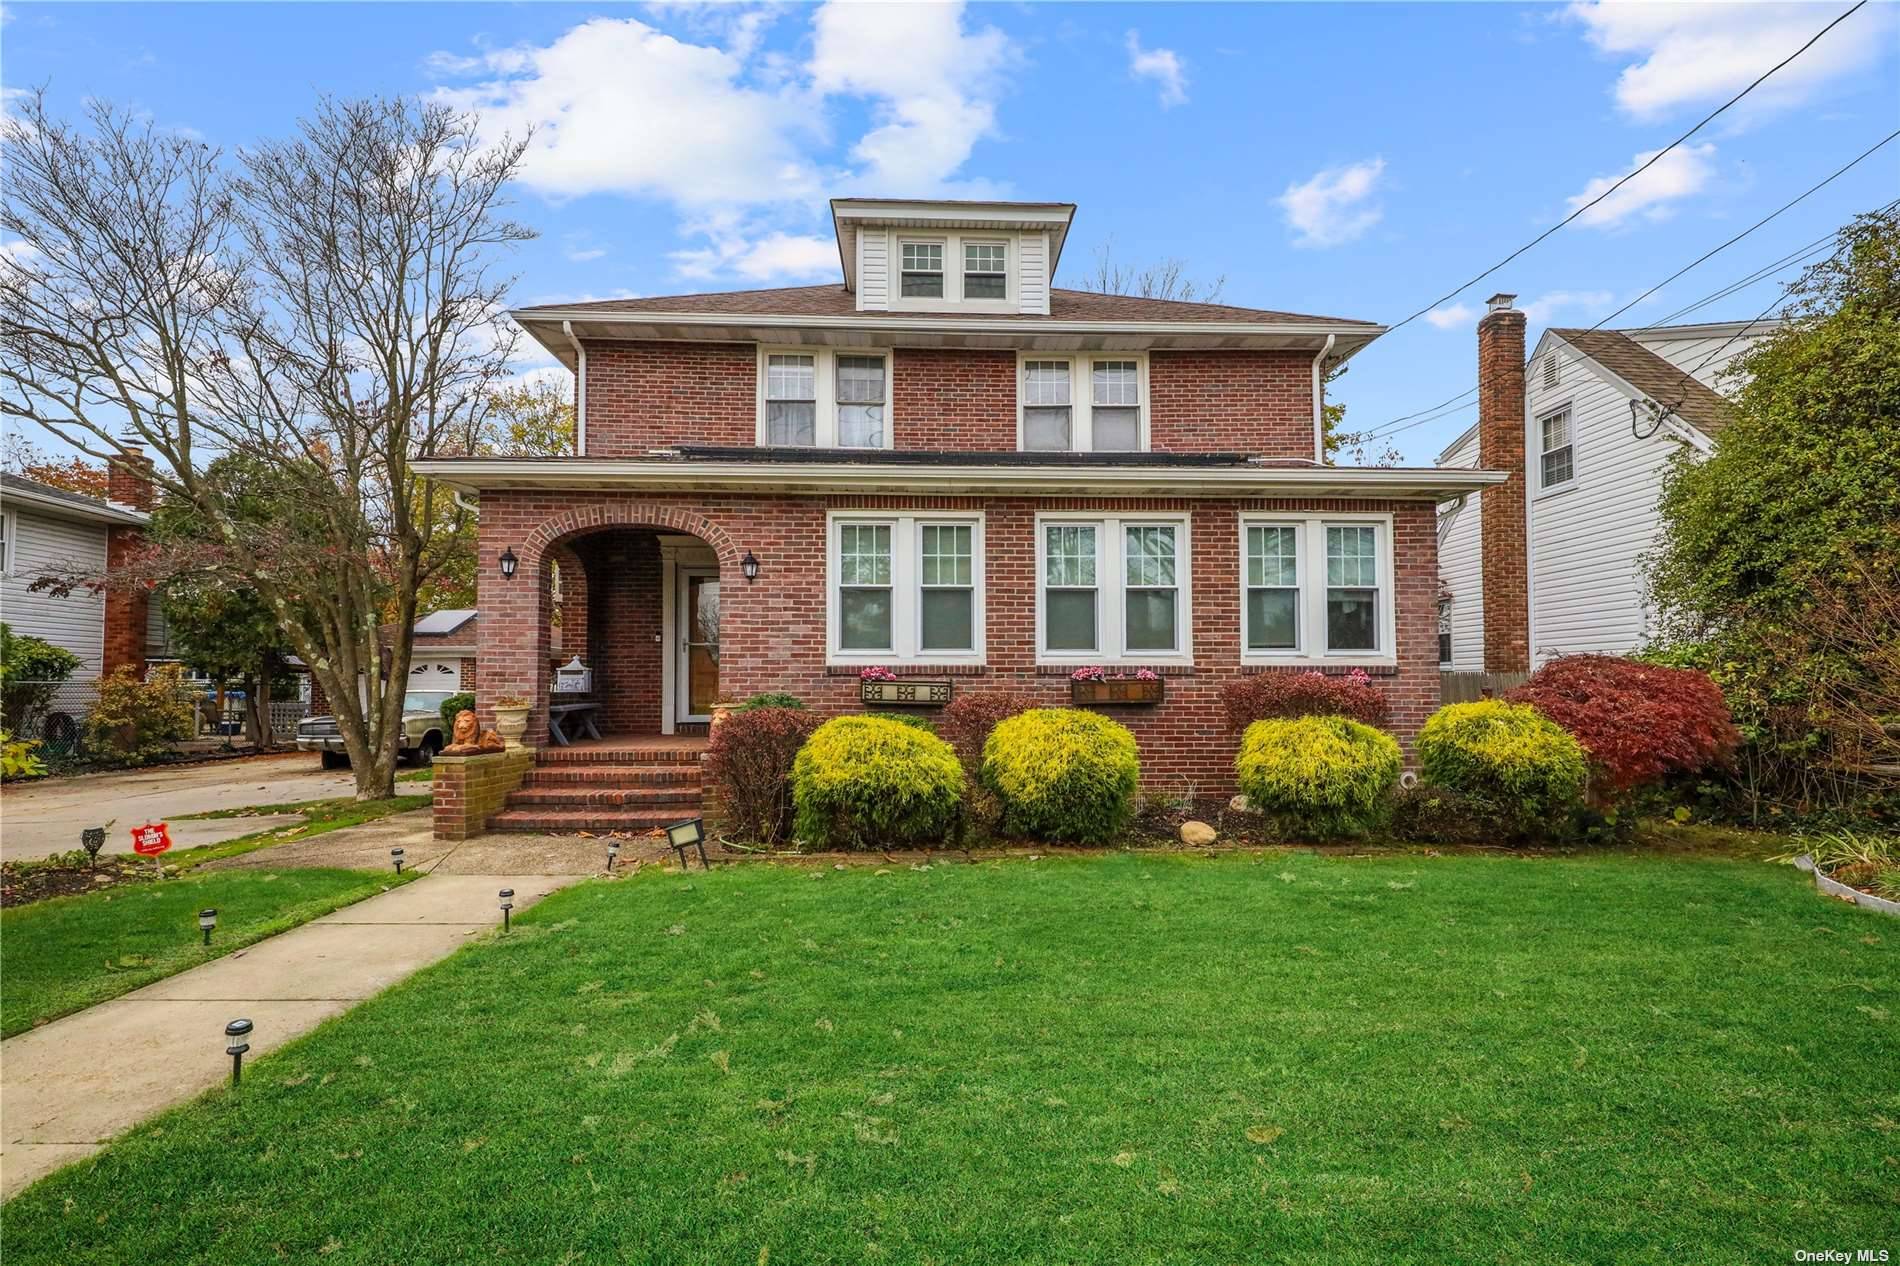 WELCOME HOME TO THIS CHARMING HISTORIC ORIGINAL 1930'S BRICK FARM HOUSE COLONIAL.